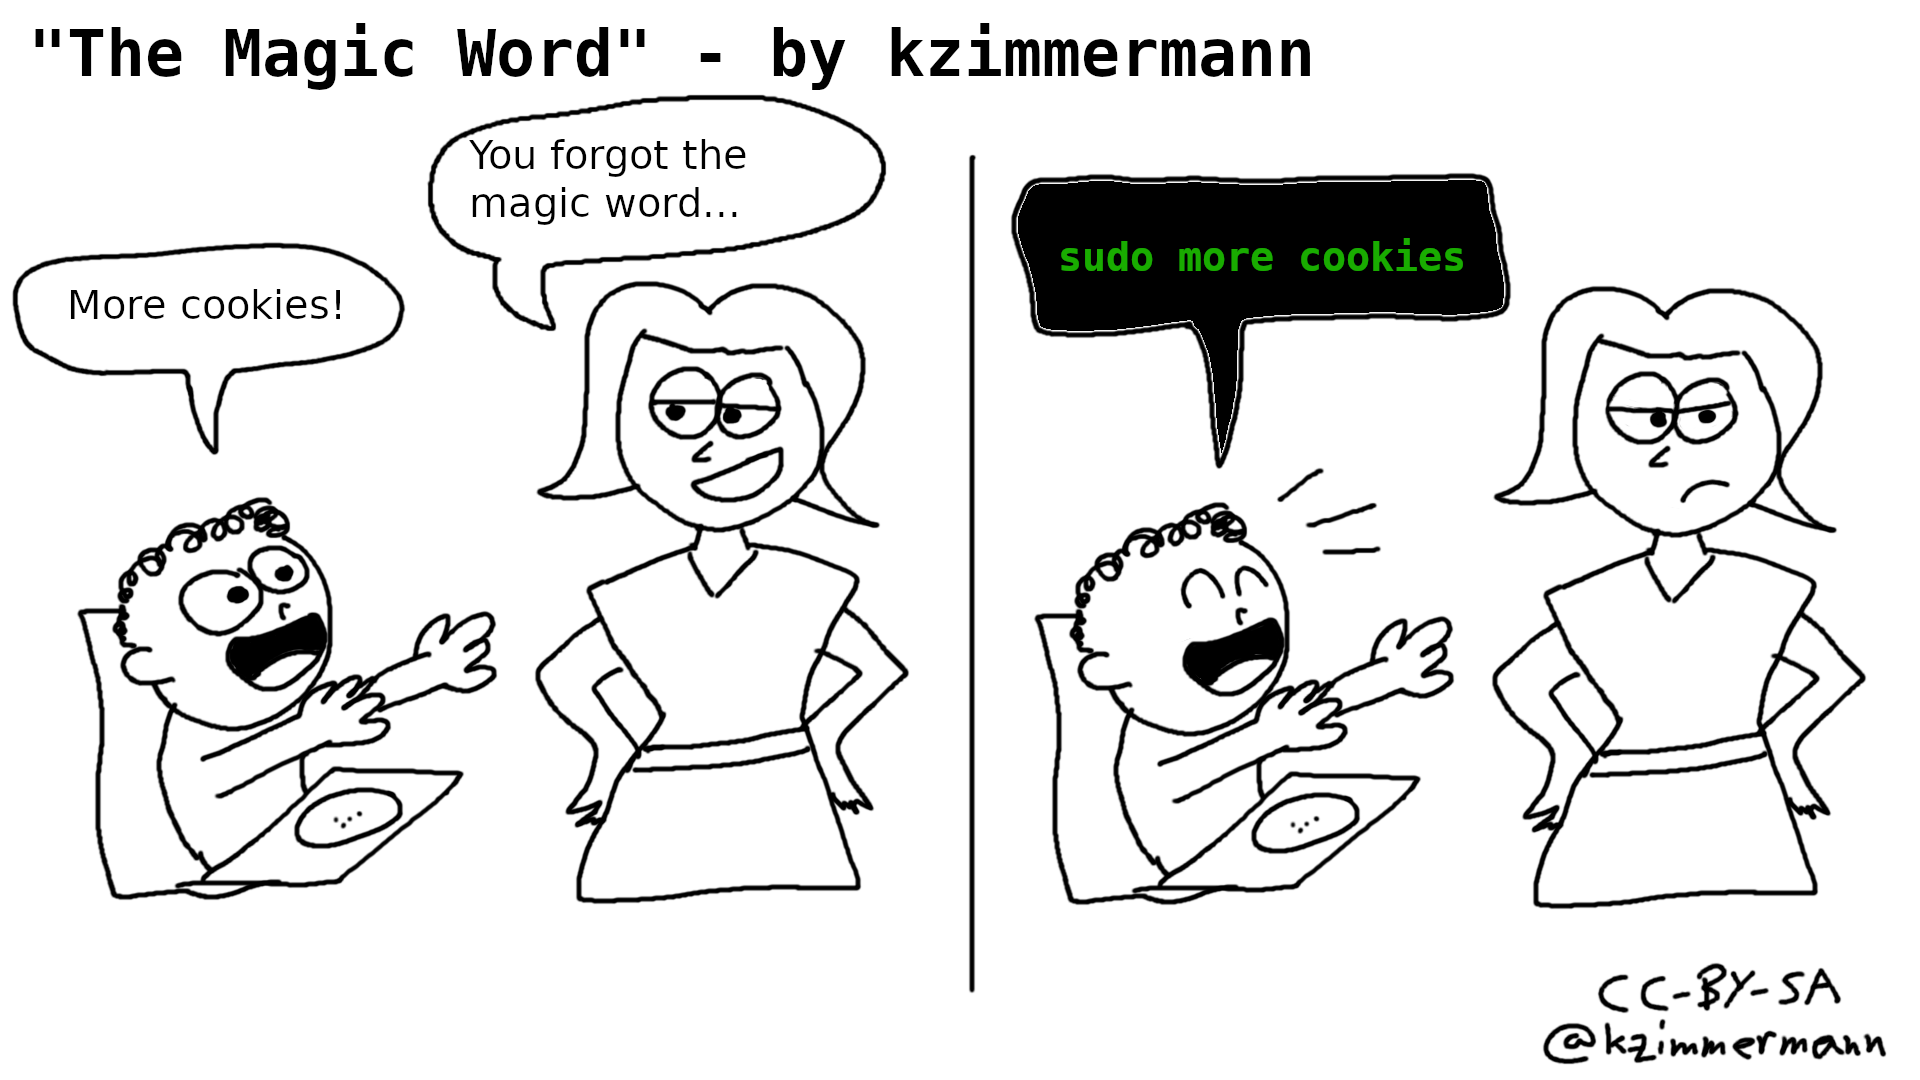 What's the magic word?